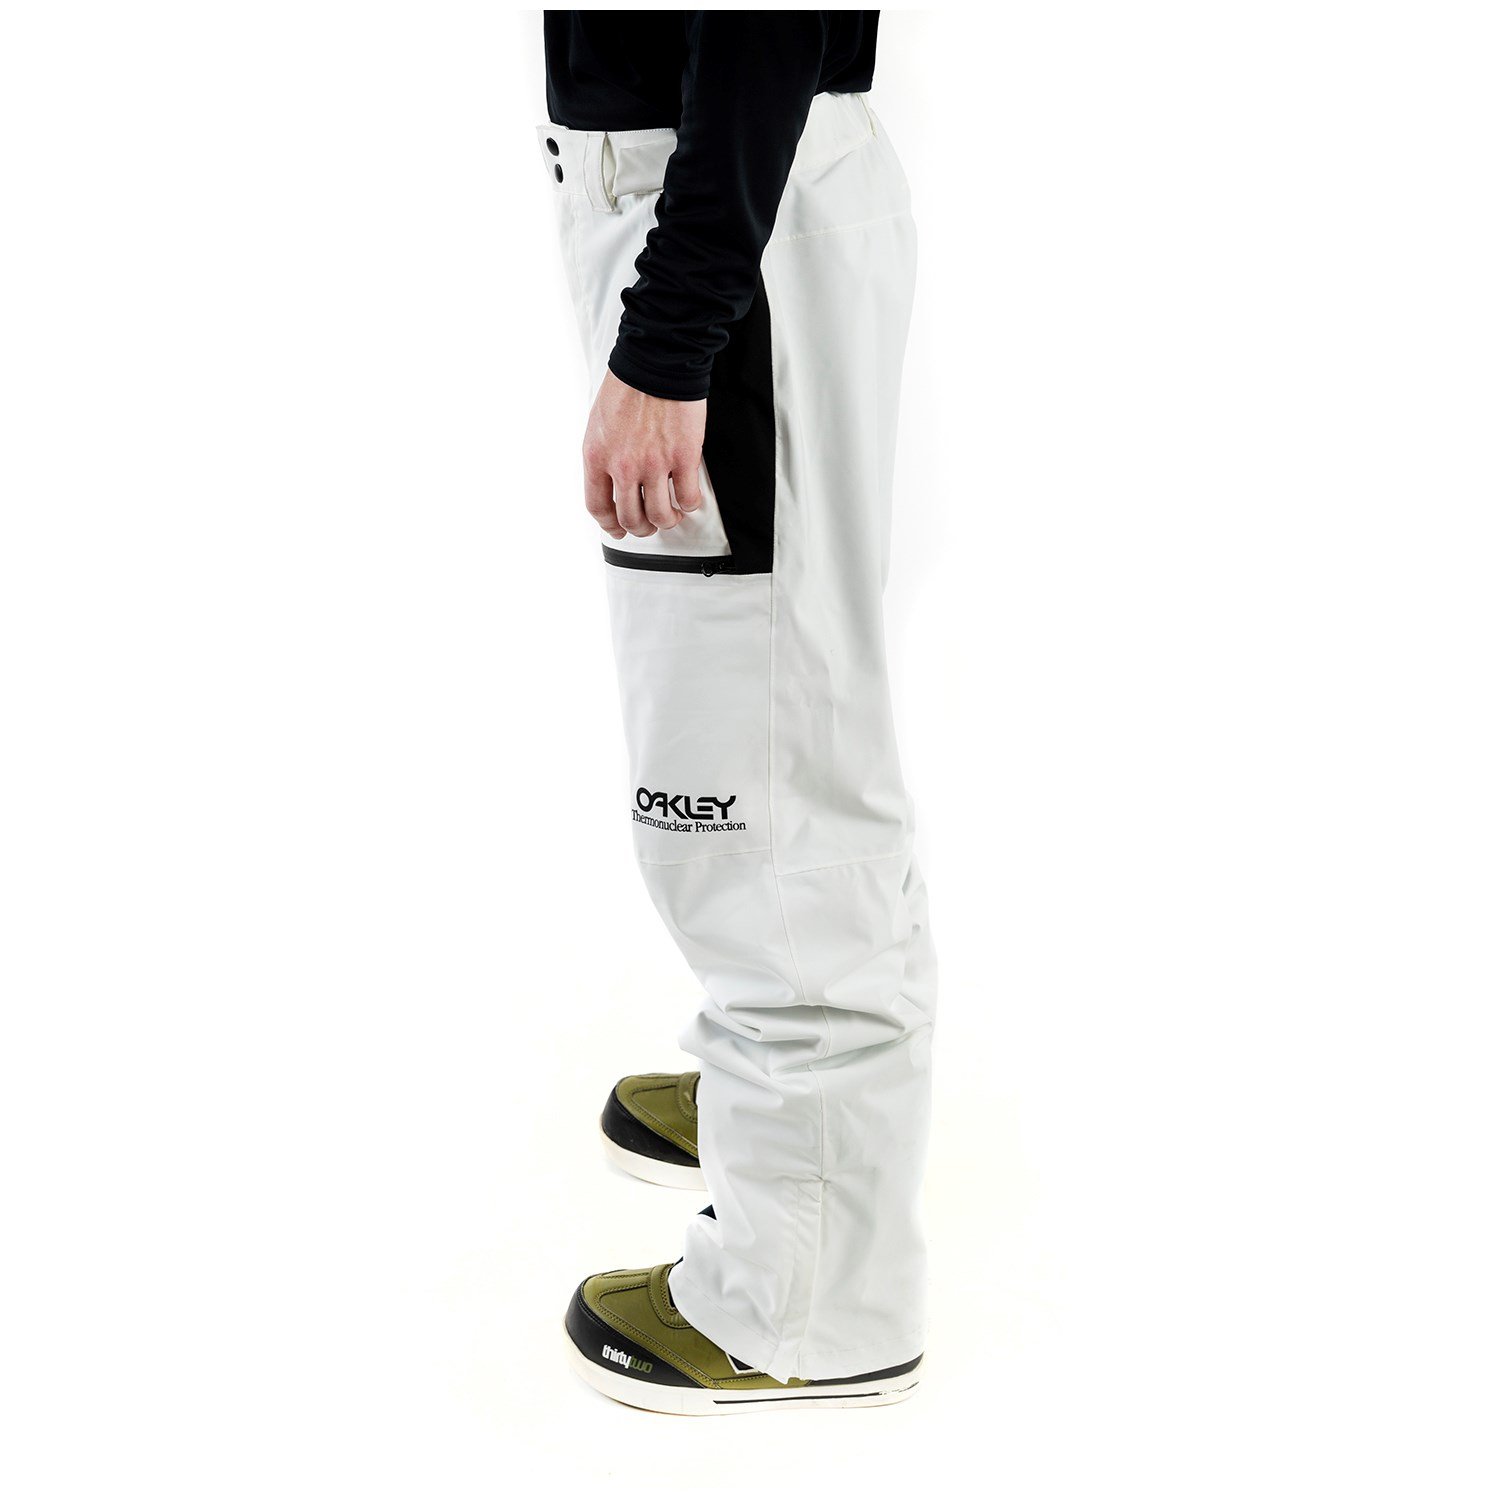 Direct stock discount Oakley Men's TNP Lined Shell Pants mirzagroup.net